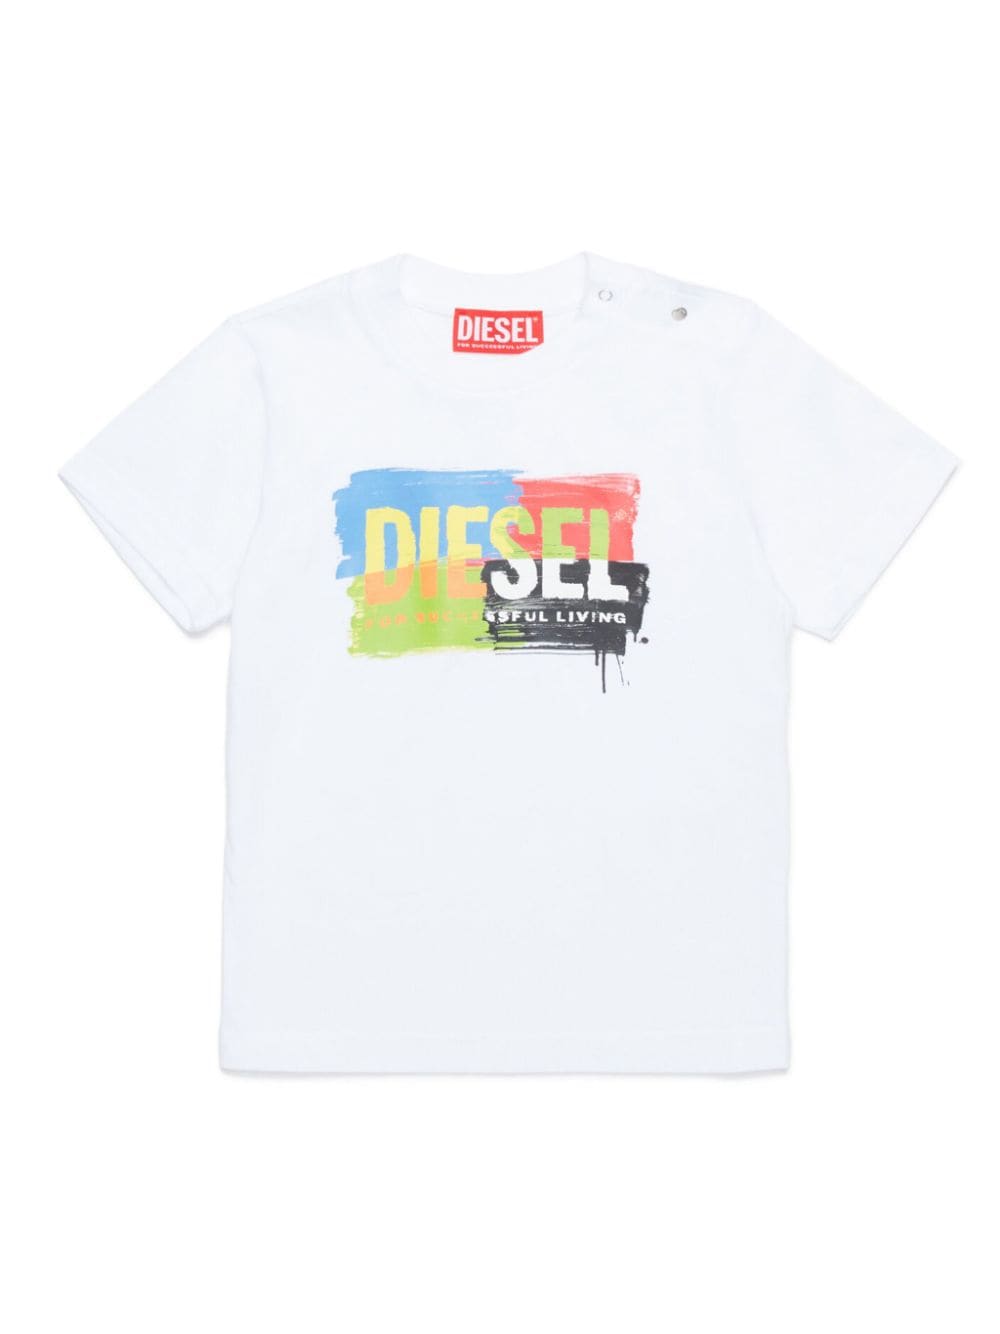 Bambini Diesel t-shirt con stampa